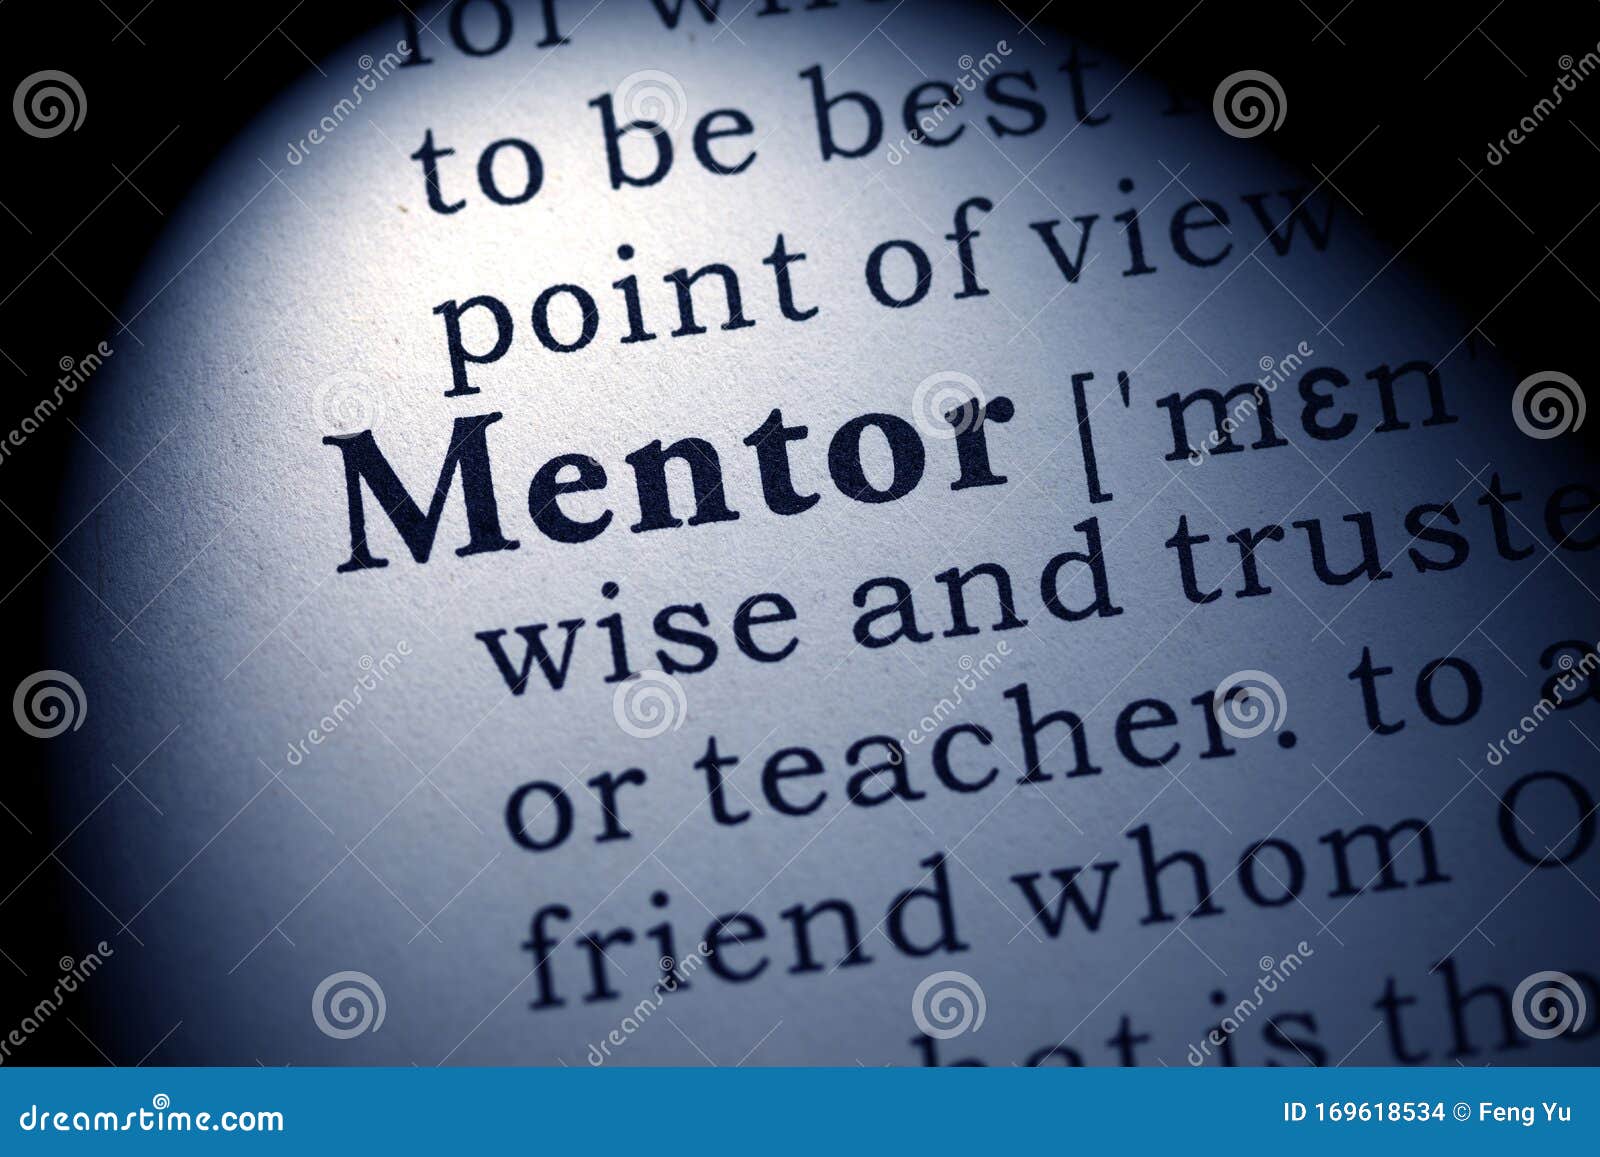 definition of the word mentor